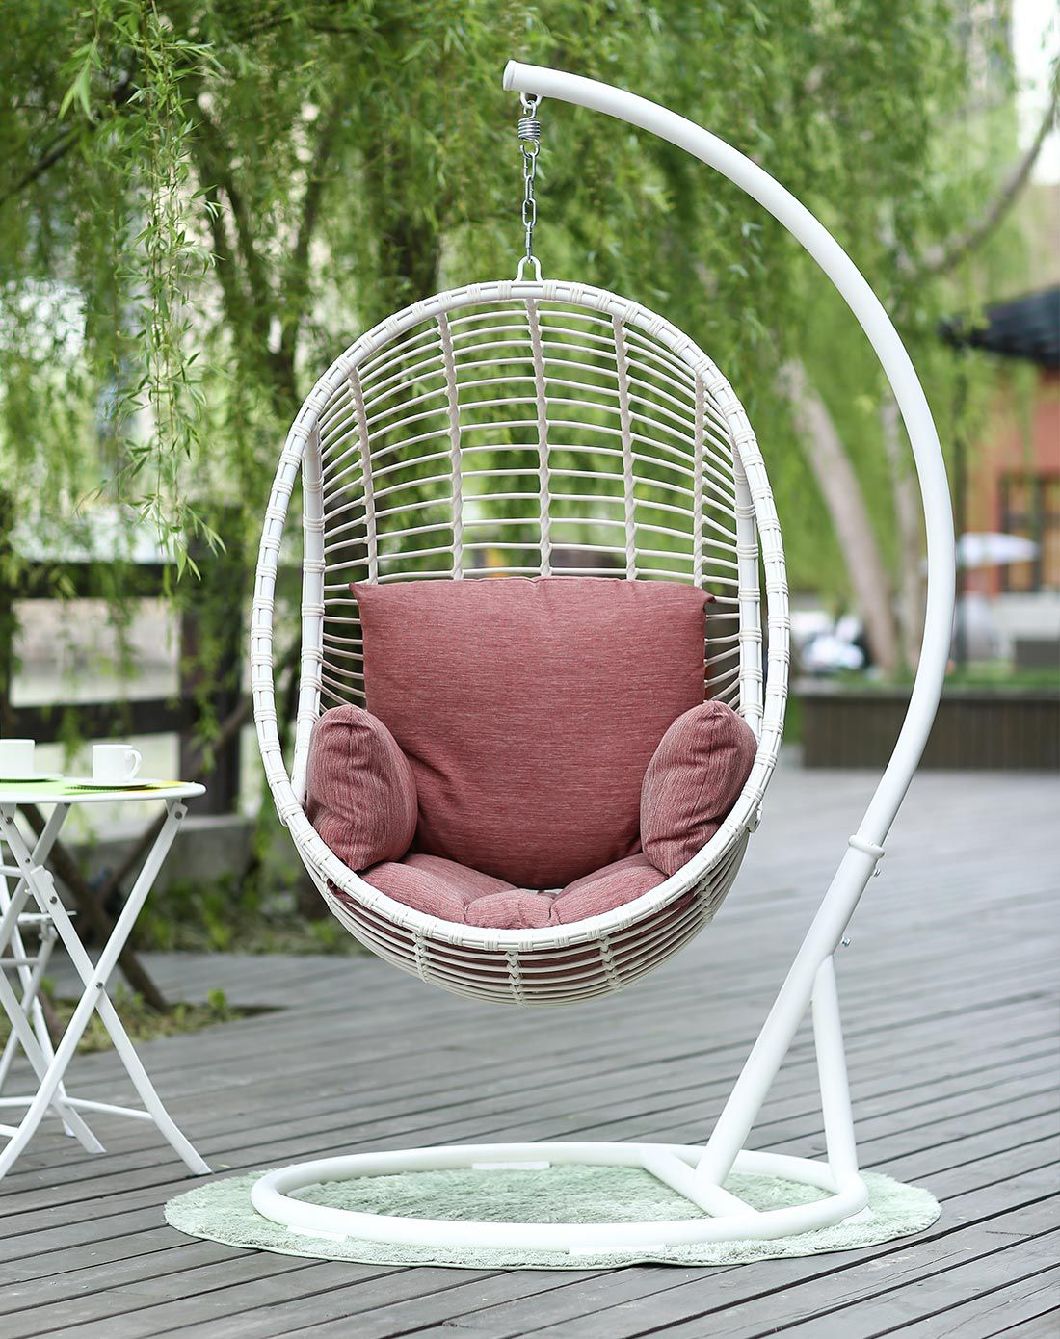 Leisure Wicker Patio Outdoor Colorful Home Garden Furniture Hanging Swing Chair